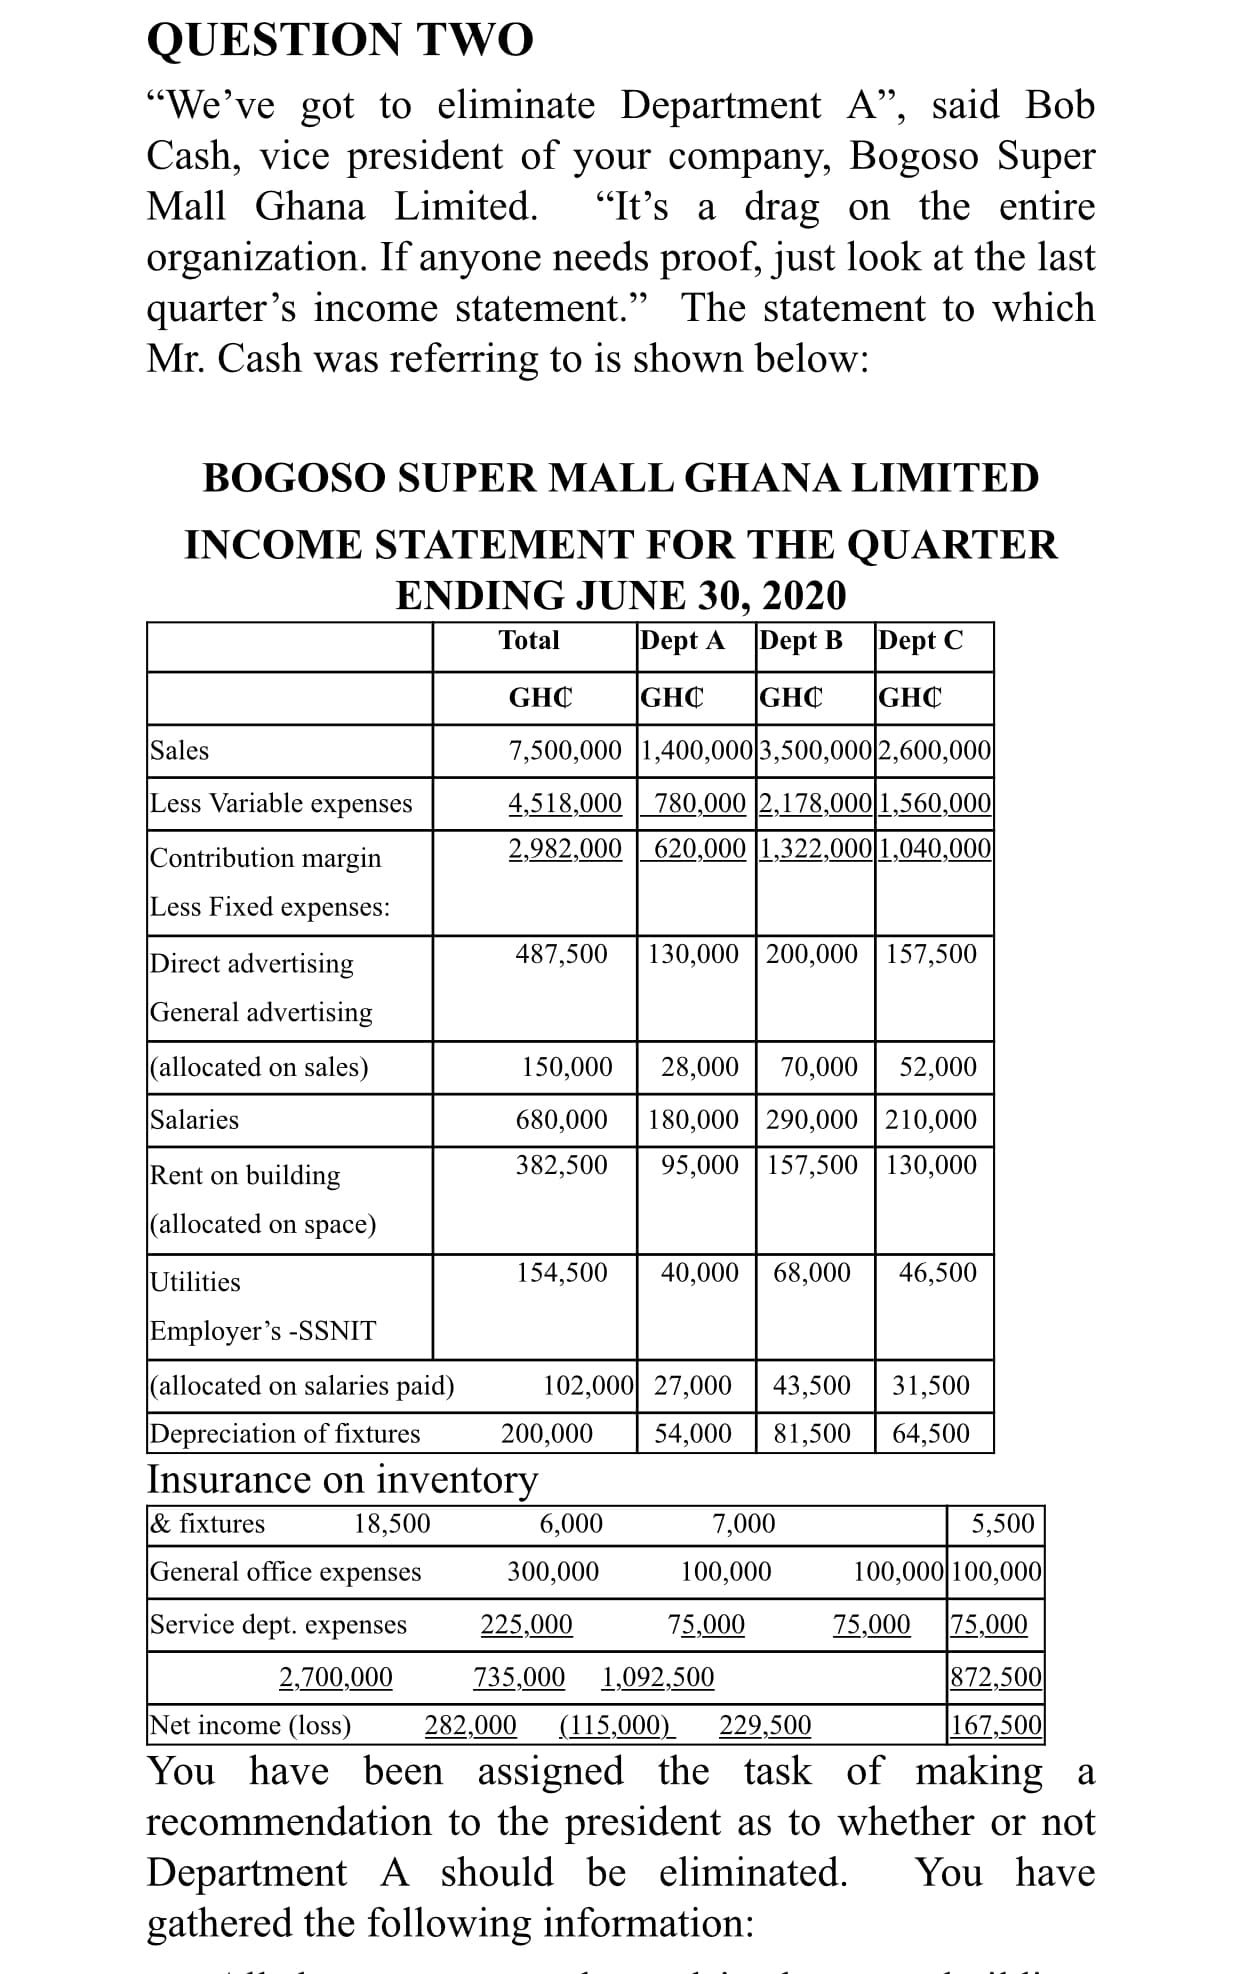 QUESTION TWO
"We've got to eliminate Department A", said Bob
Cash, vice president of your company, Bogoso Super
Mall Ghana Limited.
"It's a drag on the entire
organization. If anyone needs proof, just look at the last
quarter's income statement." The statement to which
Mr. Cash was referring to is shown below:
BOGOSO SUPER MALL GHANA LIMITED
INCOME STATEMENT FOR THE QUARTER
ENDING JUNE 30, 2020
Total
|Dept A
Dept B
Dept C
GHC
GHC
GHC
GHC
Sales
7,500,000 |1,400,0003,500,000|2,600,000
Less Variable expenses
4,518,000 780,000 2,178,000 1,560,000
2,982,000 620,000 1,322,000| 1,040,000
Contribution margin
Less Fixed expenses:
Direct advertising
487,500 |130,000 |200,000 | 157,500
General advertising
|(allocated on sales)
150,000
28,000 70,000 | 52,000
Salaries
180,000 | 290,000 |210,000
95,000 | 157,500 | 130,000
680,000
Rent on building
382,500
|(allocated on space)
Utilities
154,500
40,000 | 68,000
46,500
Employer's -SSNIT
(allocated on salaries paid)
102,000 27,000 | 43,500
31,500
Depreciation of fixtures
Insurance on inventory
200,000
54,000
81,500
64,500
& fixtures
18,500
6,000
7,000
5,500
|General office expenses
300,000
100,000
100,000 100,000|
Service dept. expenses
225,000
75,000
75,000
75,000
872,500
167,500
2,700,000
735,000
1,092,500
Net income (loss)
282,000
(115,000)
229,500
You have been assigned the task of making a
recommendation to the president as to whether or not
Department A should be eliminated.
gathered the following information:
You have
